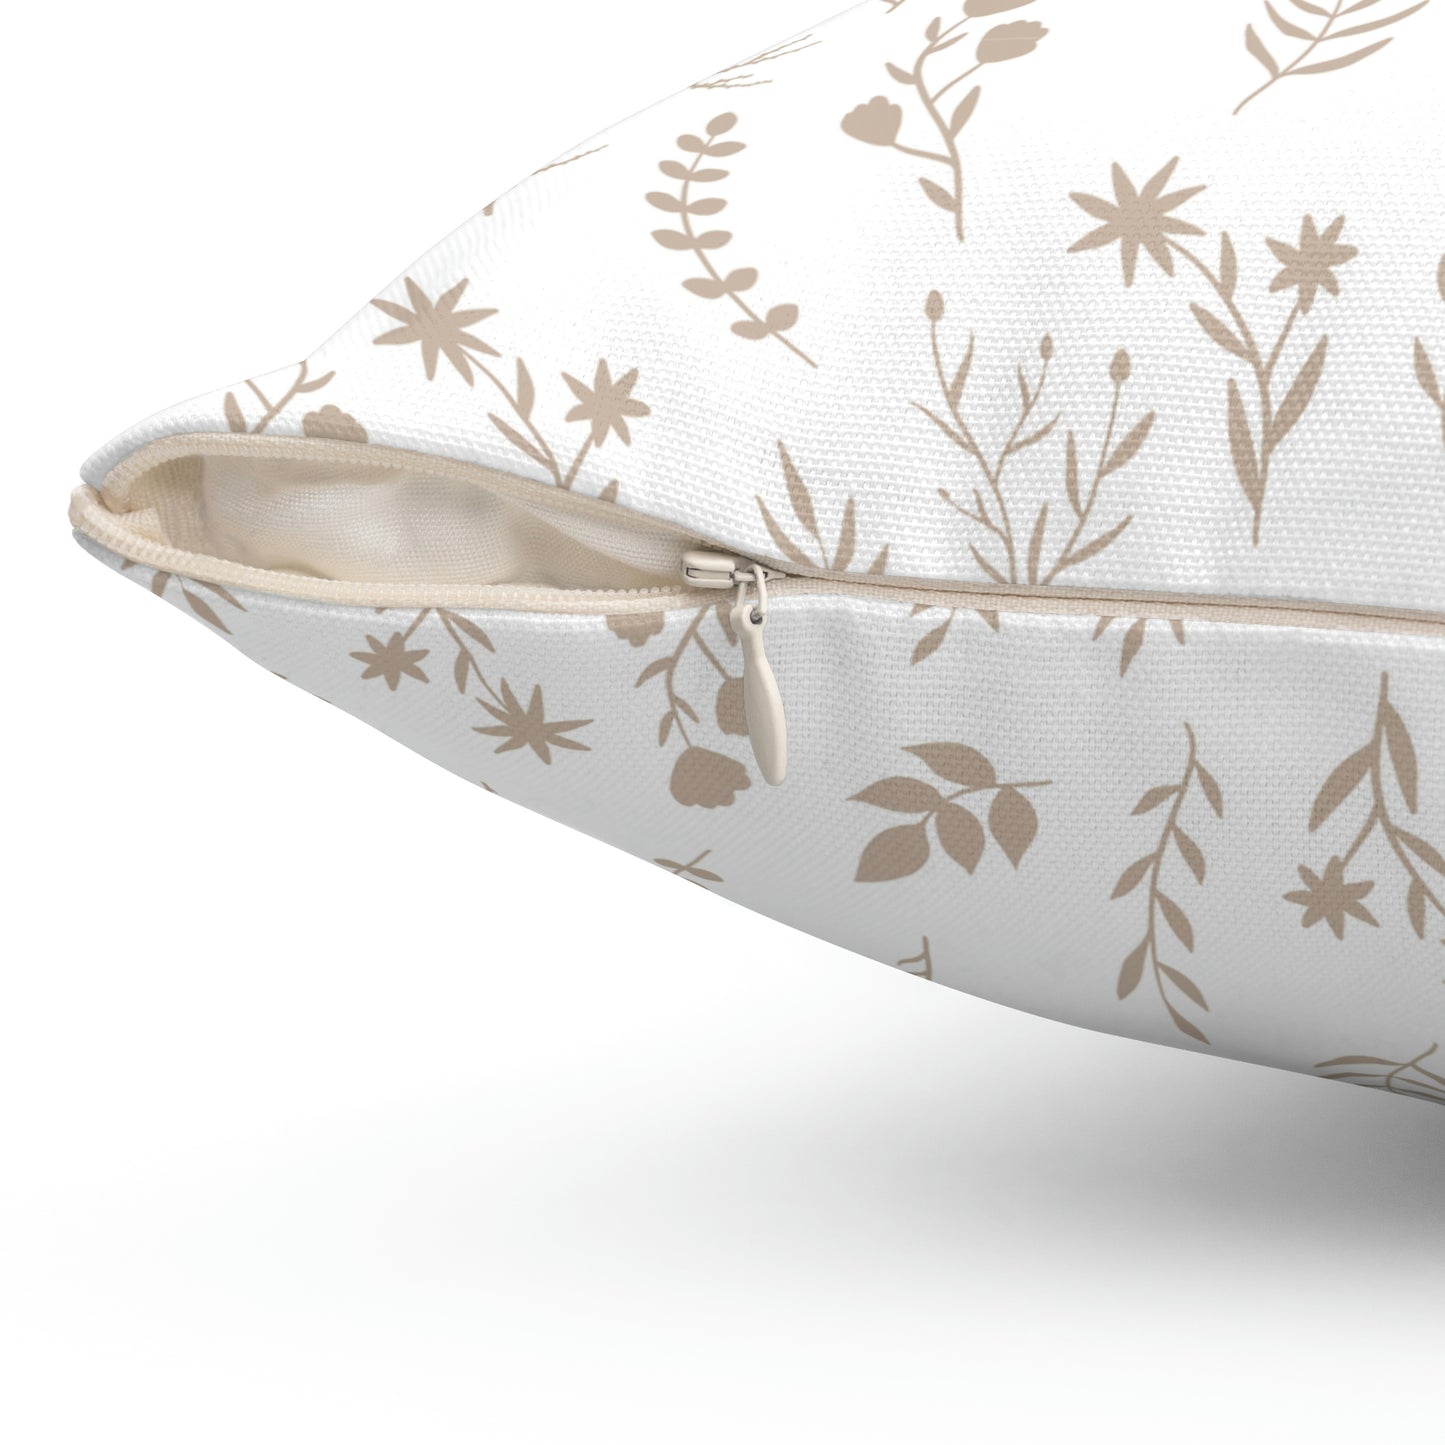 Light Taupe and White Floral Print Pillow | 4 Sizes Available